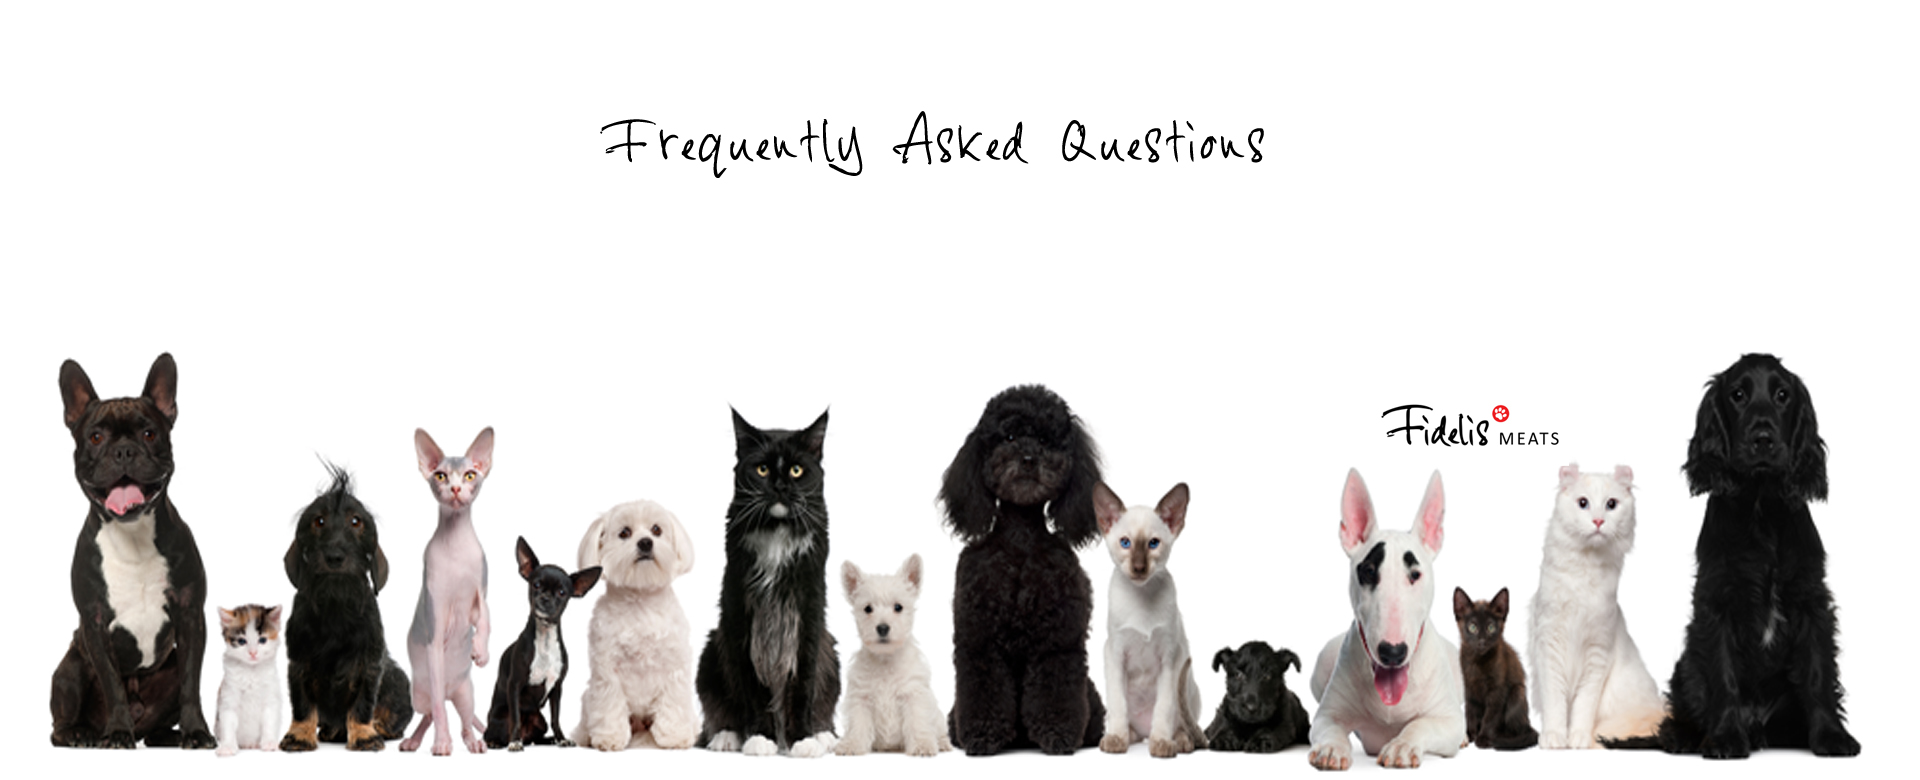 Frequently Ask Questions About Our Pet Foods